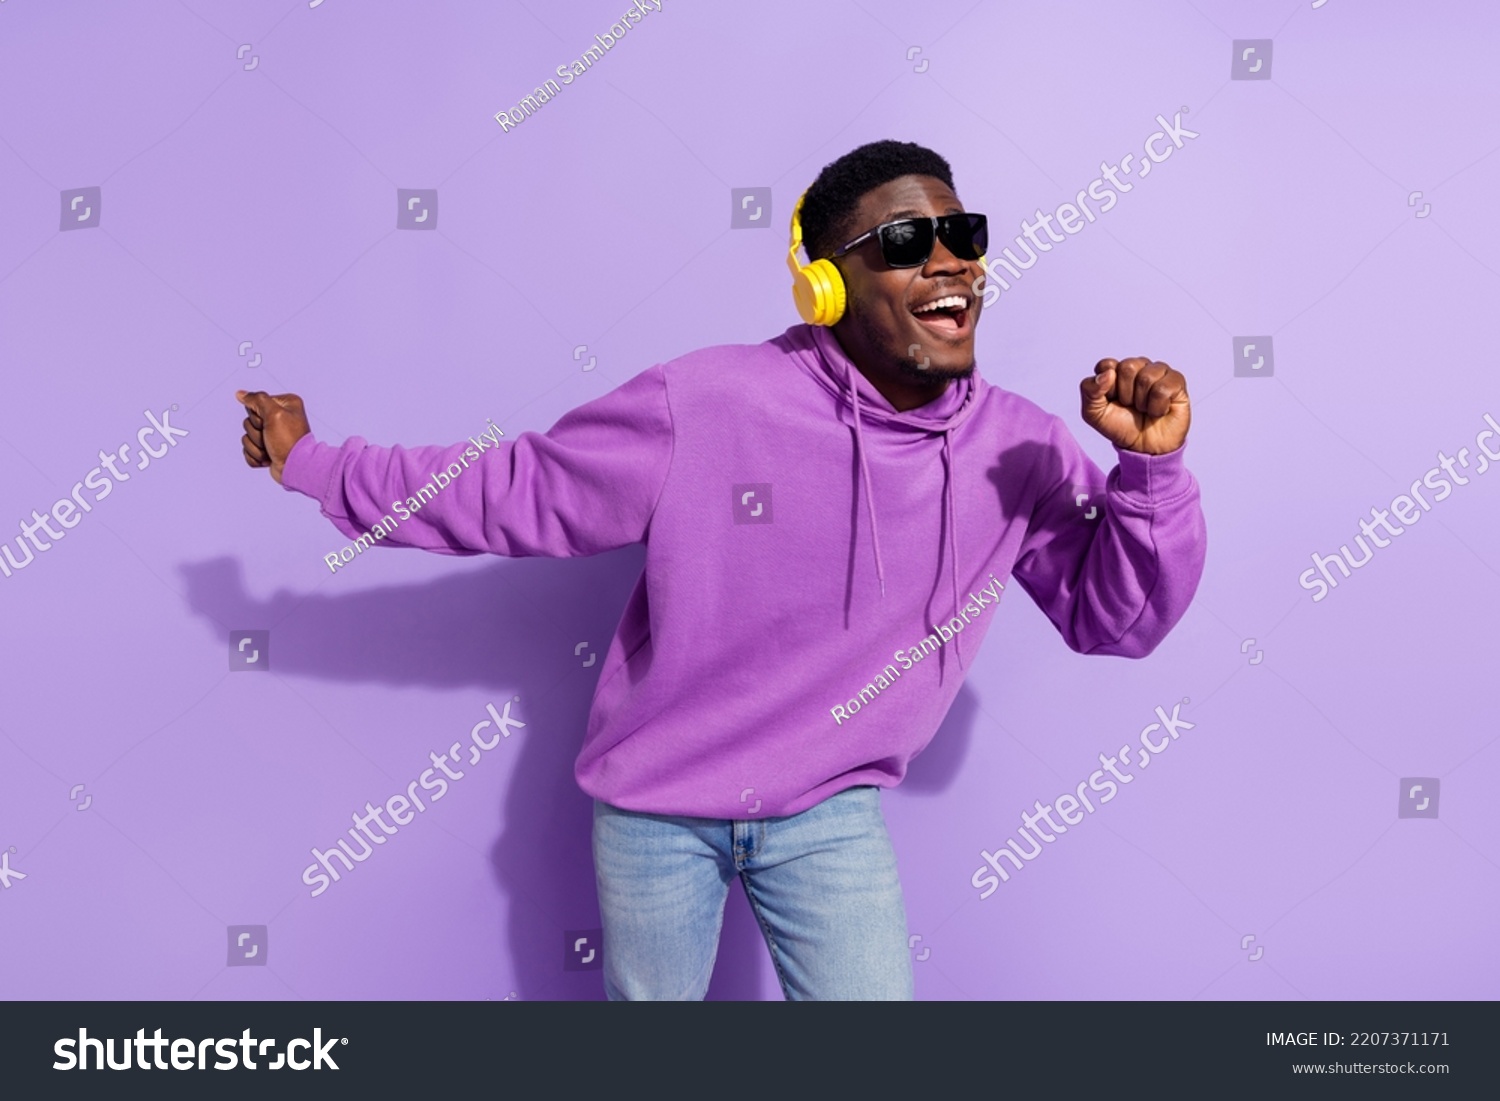 Photo of satisfied handsome person have fun chilling listen mp3 sound isolated on purple color background #2207371171